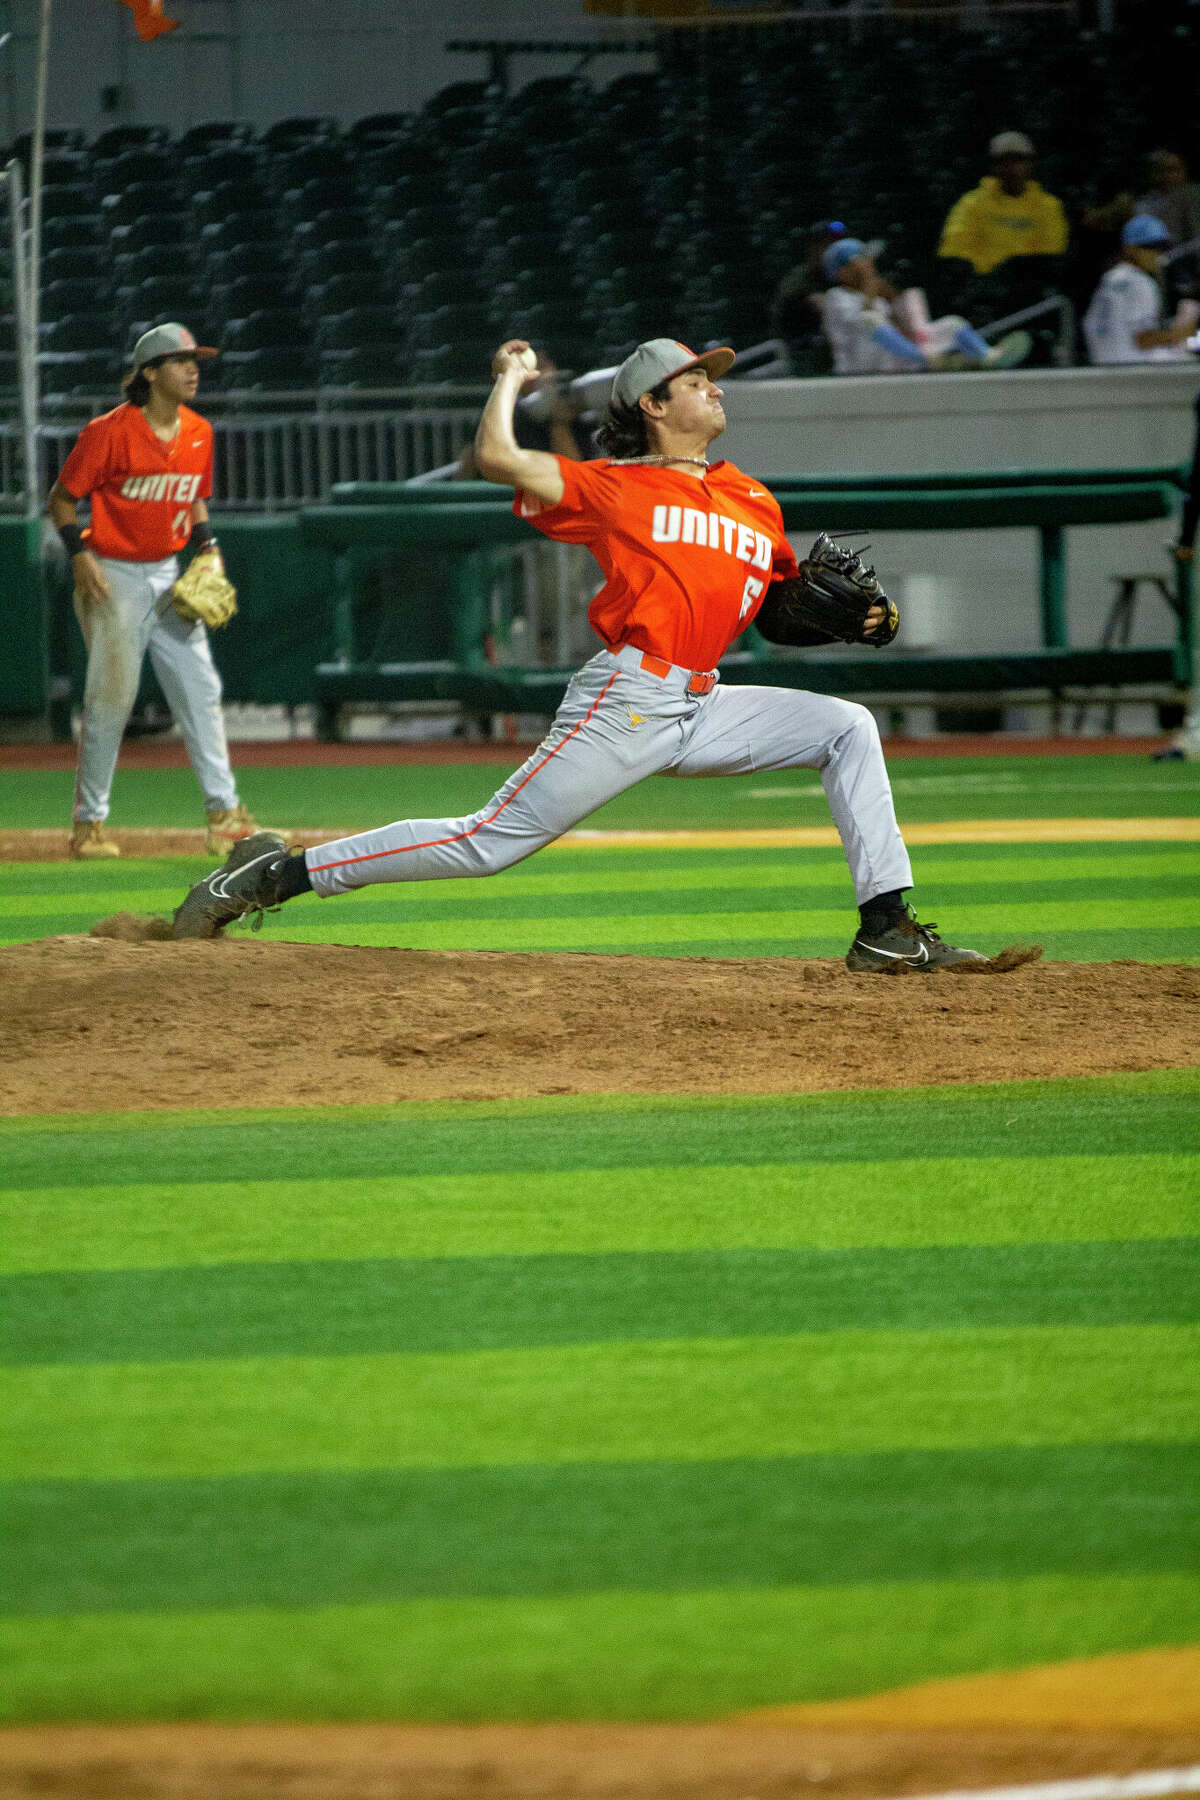 Daniel Rendon and the United Longhorns advanced to the third round of the state playoffs as they swept Los Fresnos on Friday.